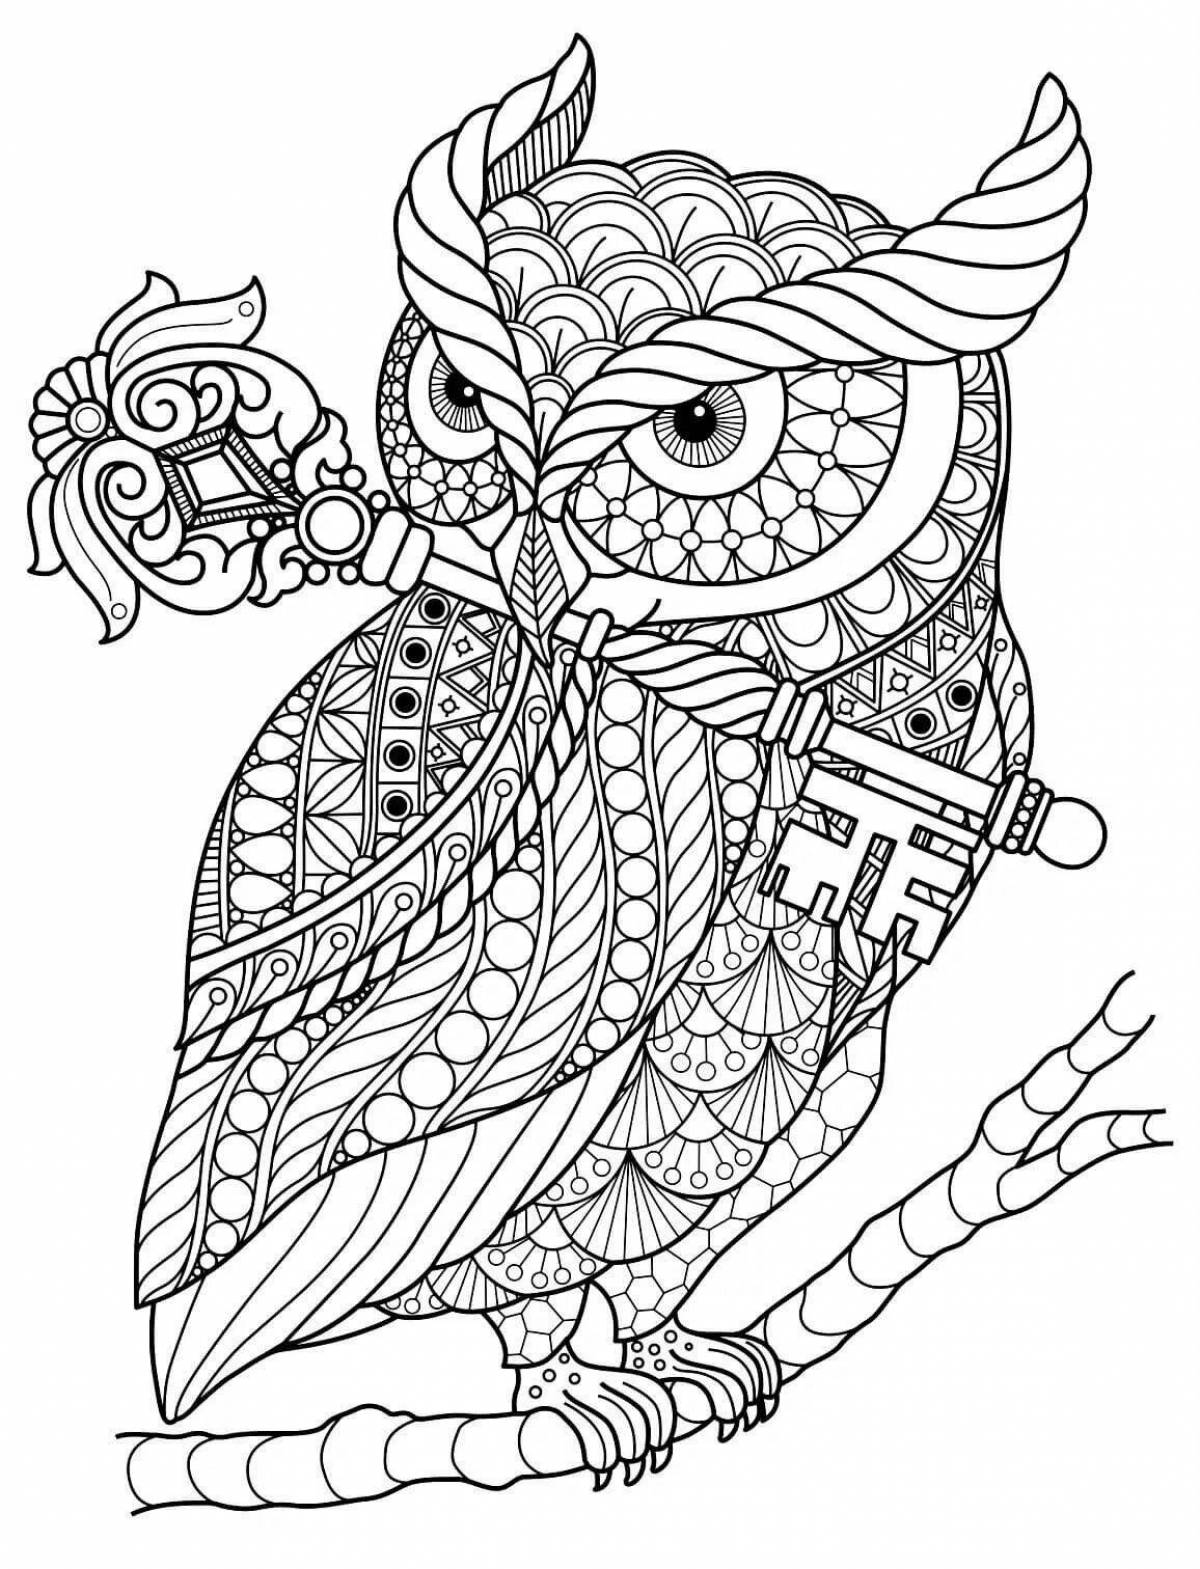 Splendorous coloring page for adults ru complex